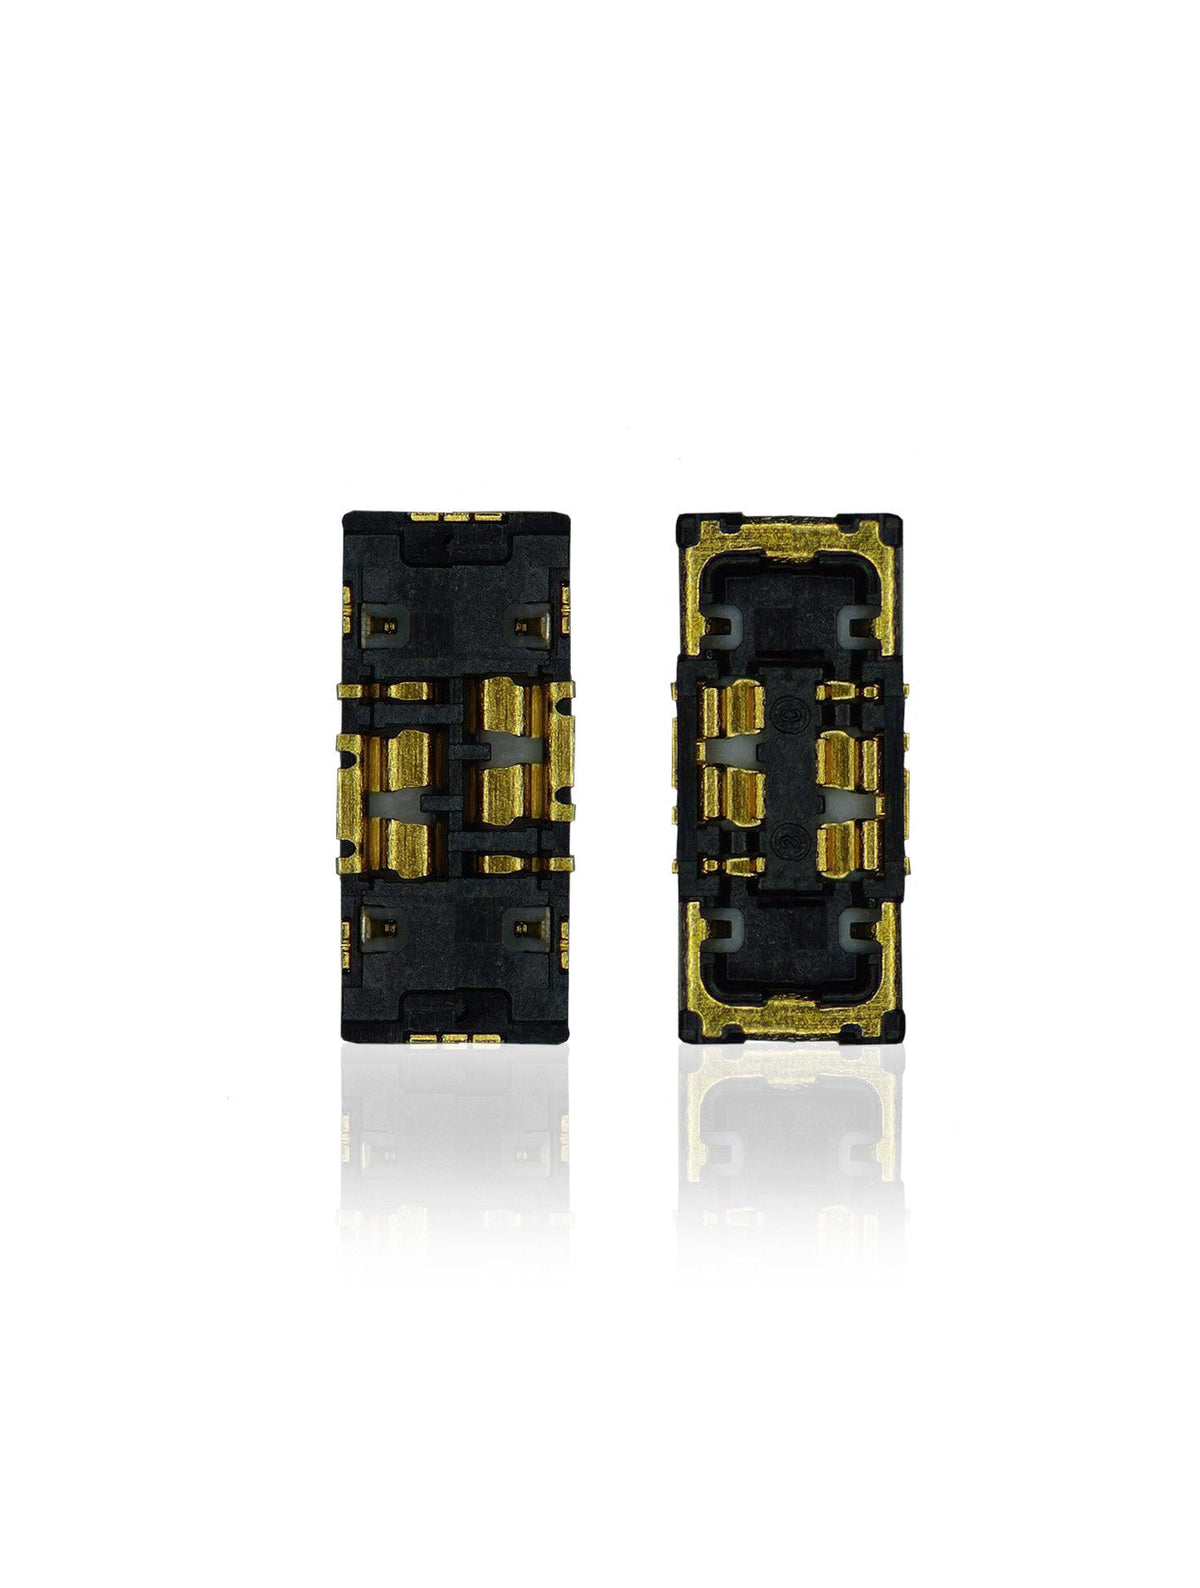 BATTERY FLEX FPC CONNECTOR COMPATIBLE WITH IPHONE XR (J3200: 4 PIN)